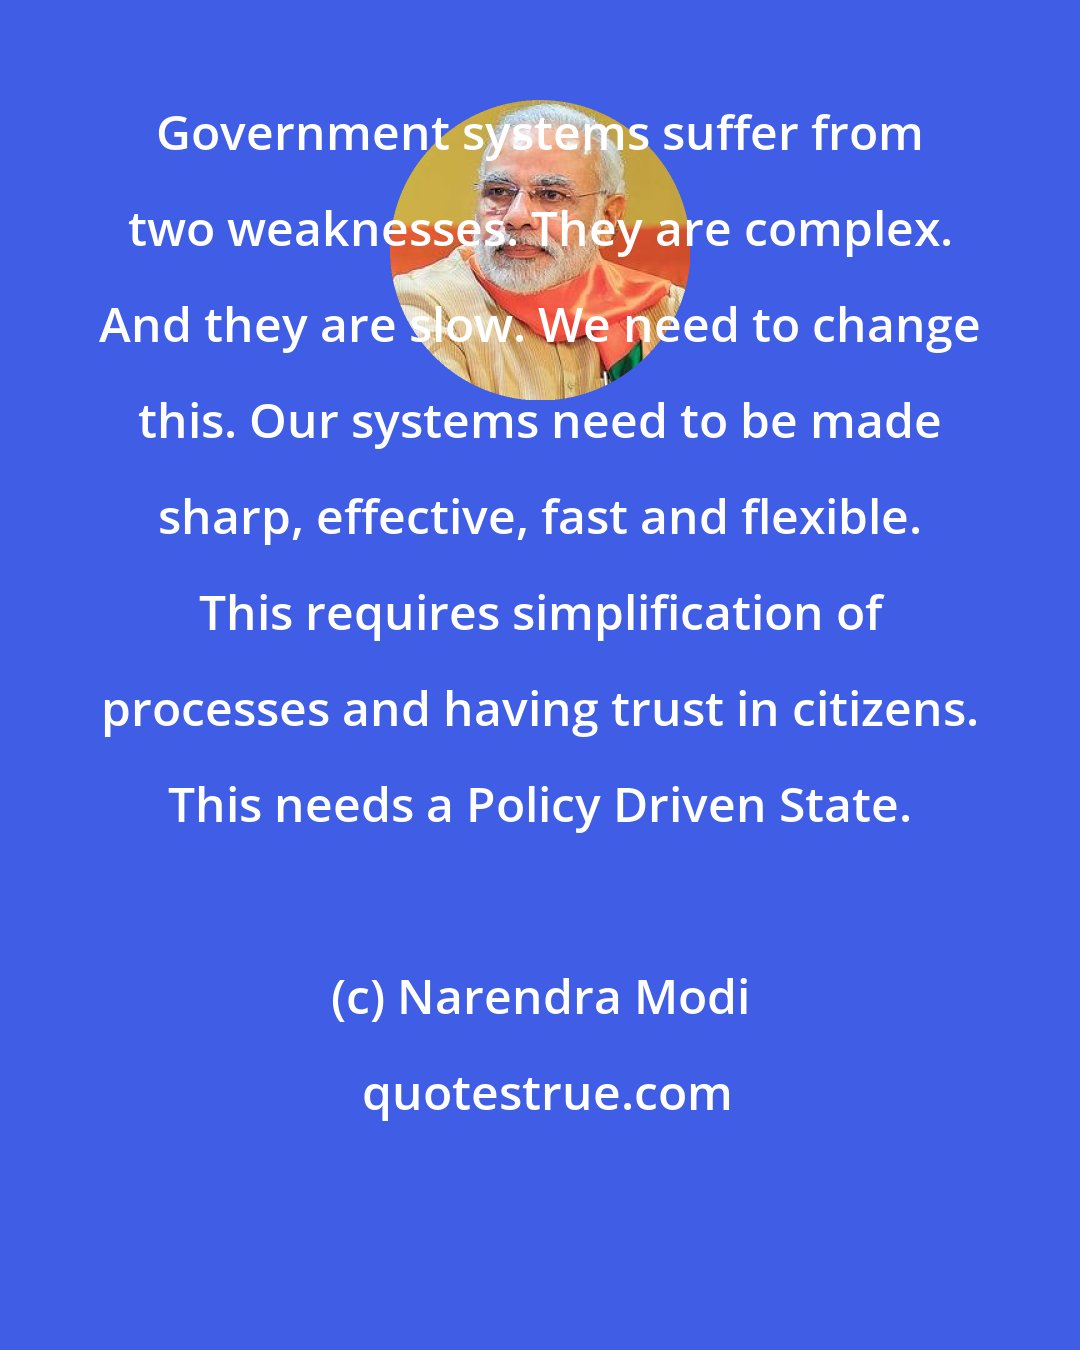 Narendra Modi: Government systems suffer from two weaknesses. They are complex. And they are slow. We need to change this. Our systems need to be made sharp, effective, fast and flexible. This requires simplification of processes and having trust in citizens. This needs a Policy Driven State.